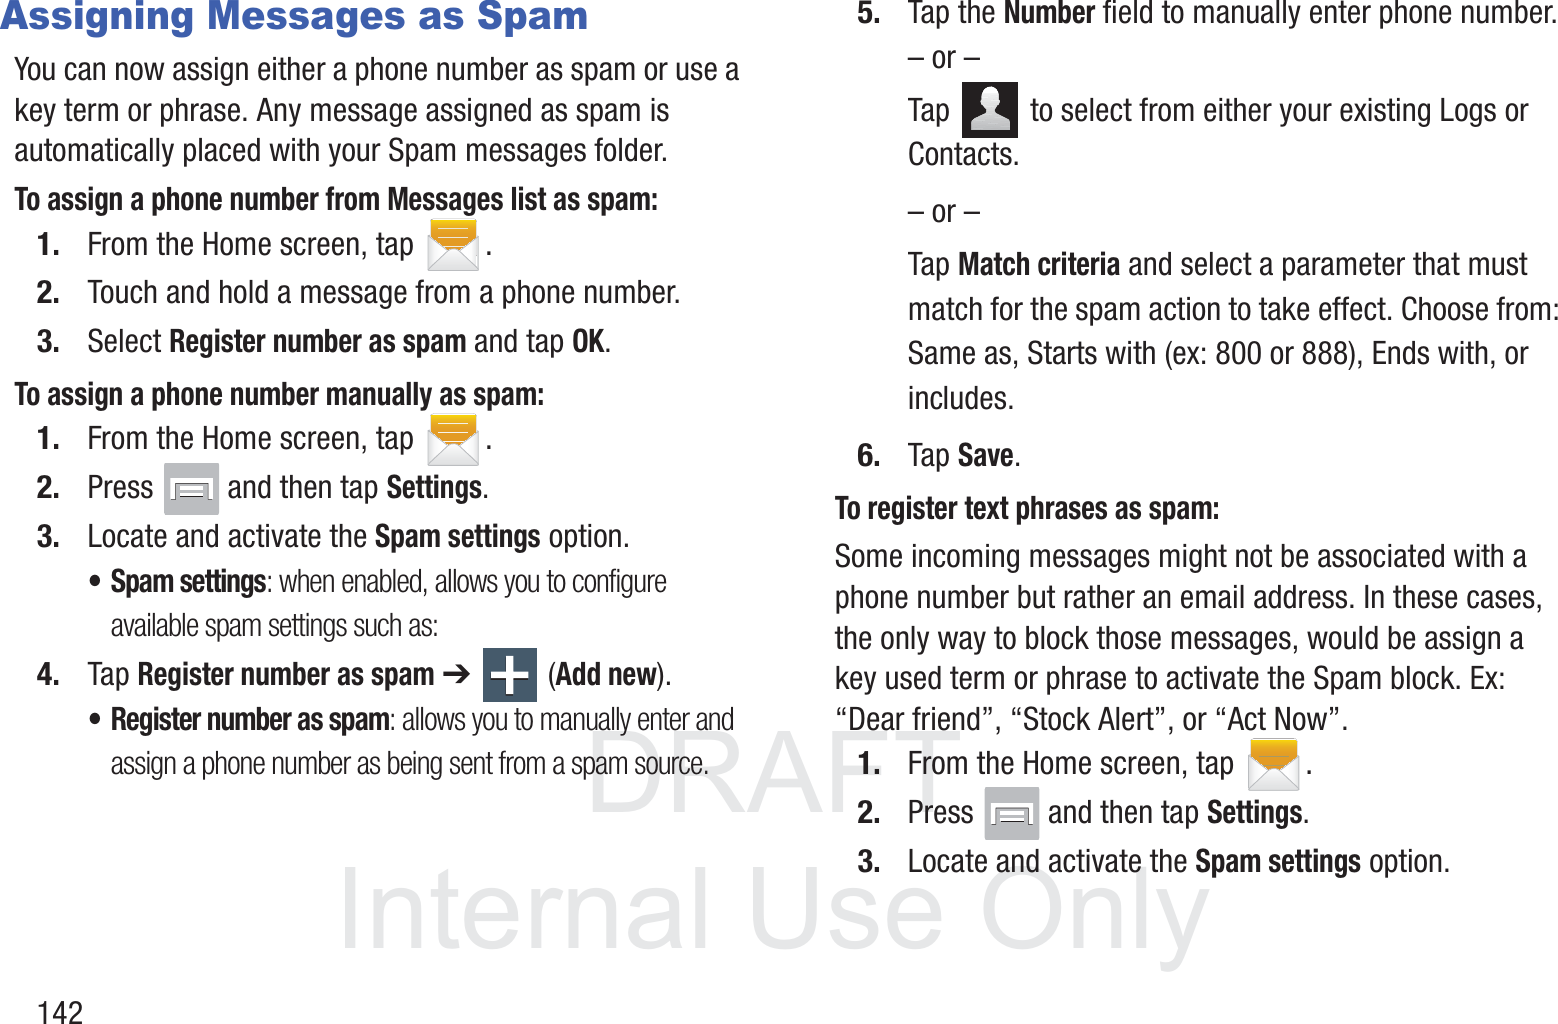 DRAFT InternalUse Only142Assigning Messages as SpamYou can now assign either a phone number as spam or use a key term or phrase. Any message assigned as spam is automatically placed with your Spam messages folder.To assign a phone number from Messages list as spam:1. From the Home screen, tap  .2. Touch and hold a message from a phone number.3. Select Register number as spam and tap OK.To assign a phone number manually as spam:1. From the Home screen, tap  .2. Press   and then tap Settings.3. Locate and activate the Spam settings option.• Spam settings: when enabled, allows you to configure available spam settings such as:4. Tap Register number as spam ➔  (Add new).• Register number as spam: allows you to manually enter and assign a phone number as being sent from a spam source.5. Tap the Number field to manually enter phone number.– or –Tap   to select from either your existing Logs or Contacts.– or –Tap Match criteria and select a parameter that must match for the spam action to take effect. Choose from: Same as, Starts with (ex: 800 or 888), Ends with, or includes.6. Tap Save. To register text phrases as spam:Some incoming messages might not be associated with a phone number but rather an email address. In these cases, the only way to block those messages, would be assign a key used term or phrase to activate the Spam block. Ex: “Dear friend”, “Stock Alert”, or “Act Now”.1. From the Home screen, tap  .2. Press   and then tap Settings.3. Locate and activate the Spam settings option.